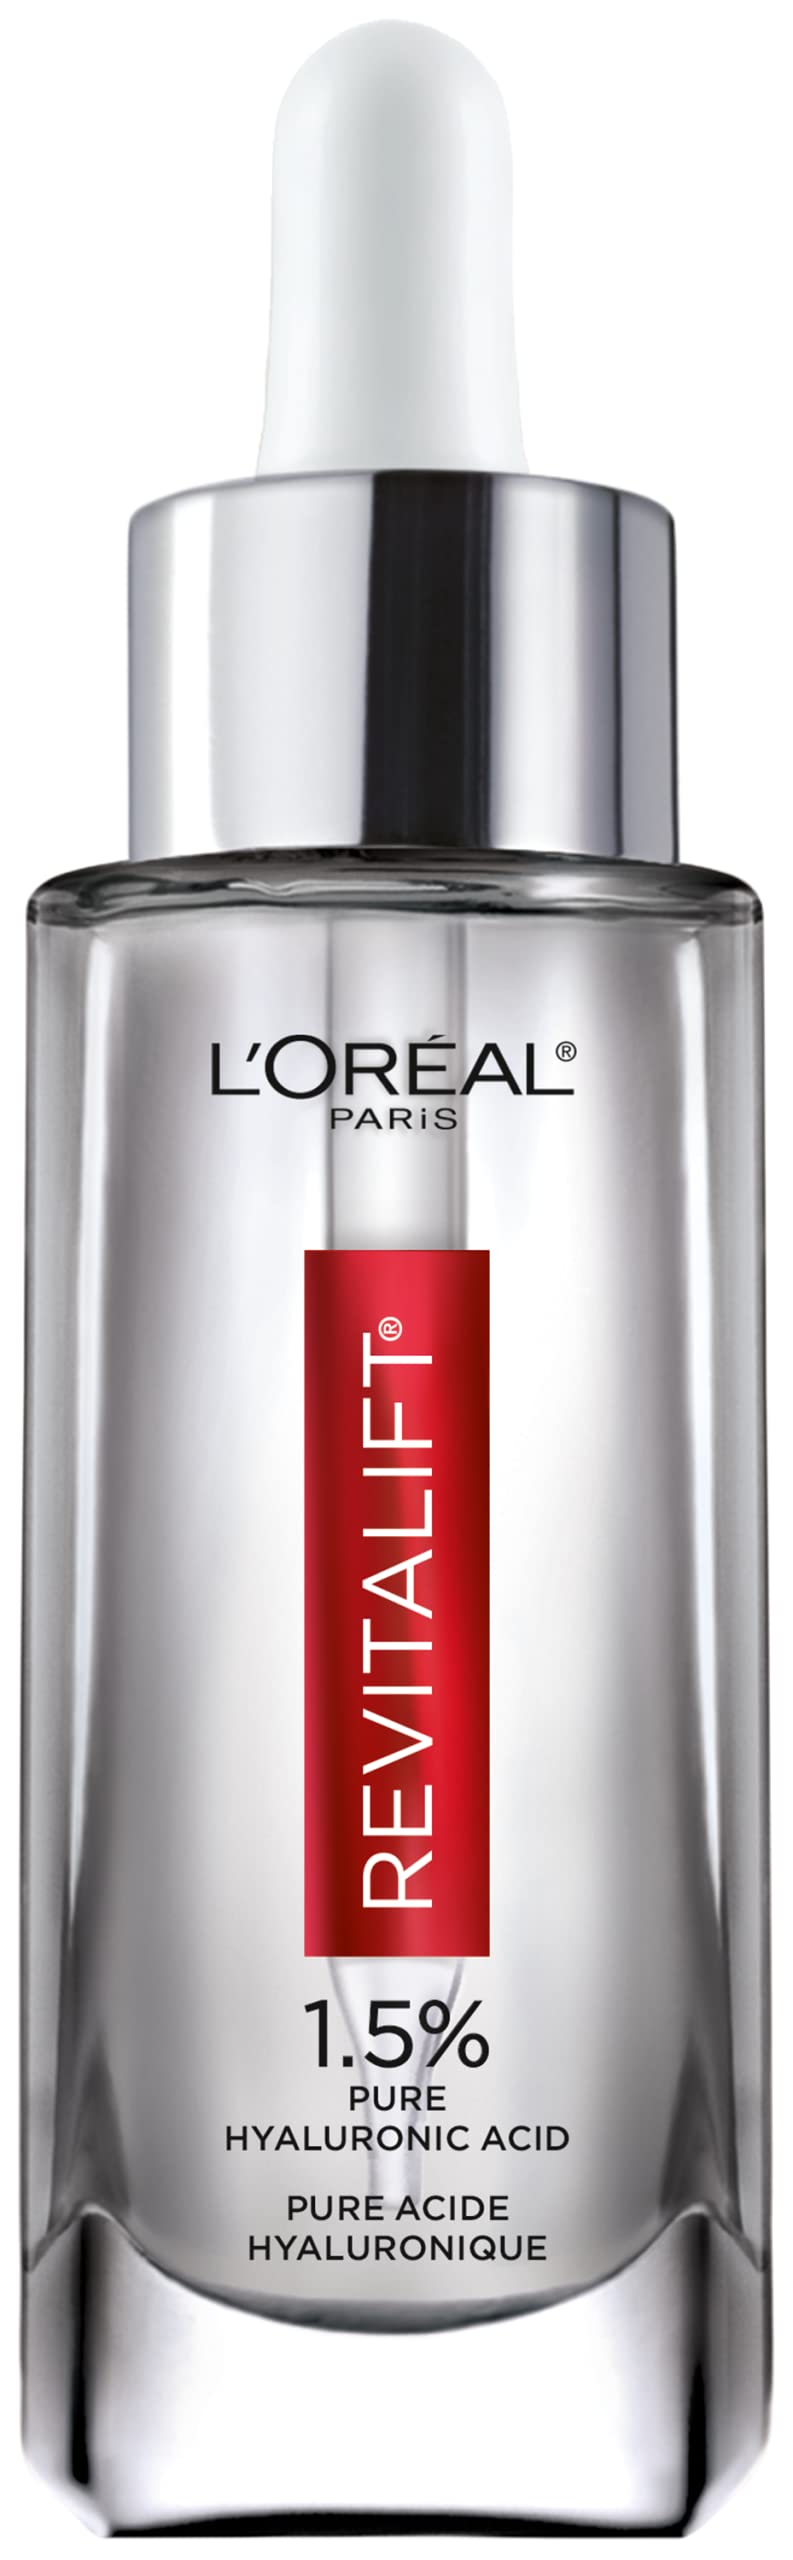 L'Oreal Paris Revitalift 1.5% Pure Hyaluronic Acid Face Serum, Hydrate & Reduce Wrinkles, Fragrance Free 1 oz [Subscribe & Save] $16.87